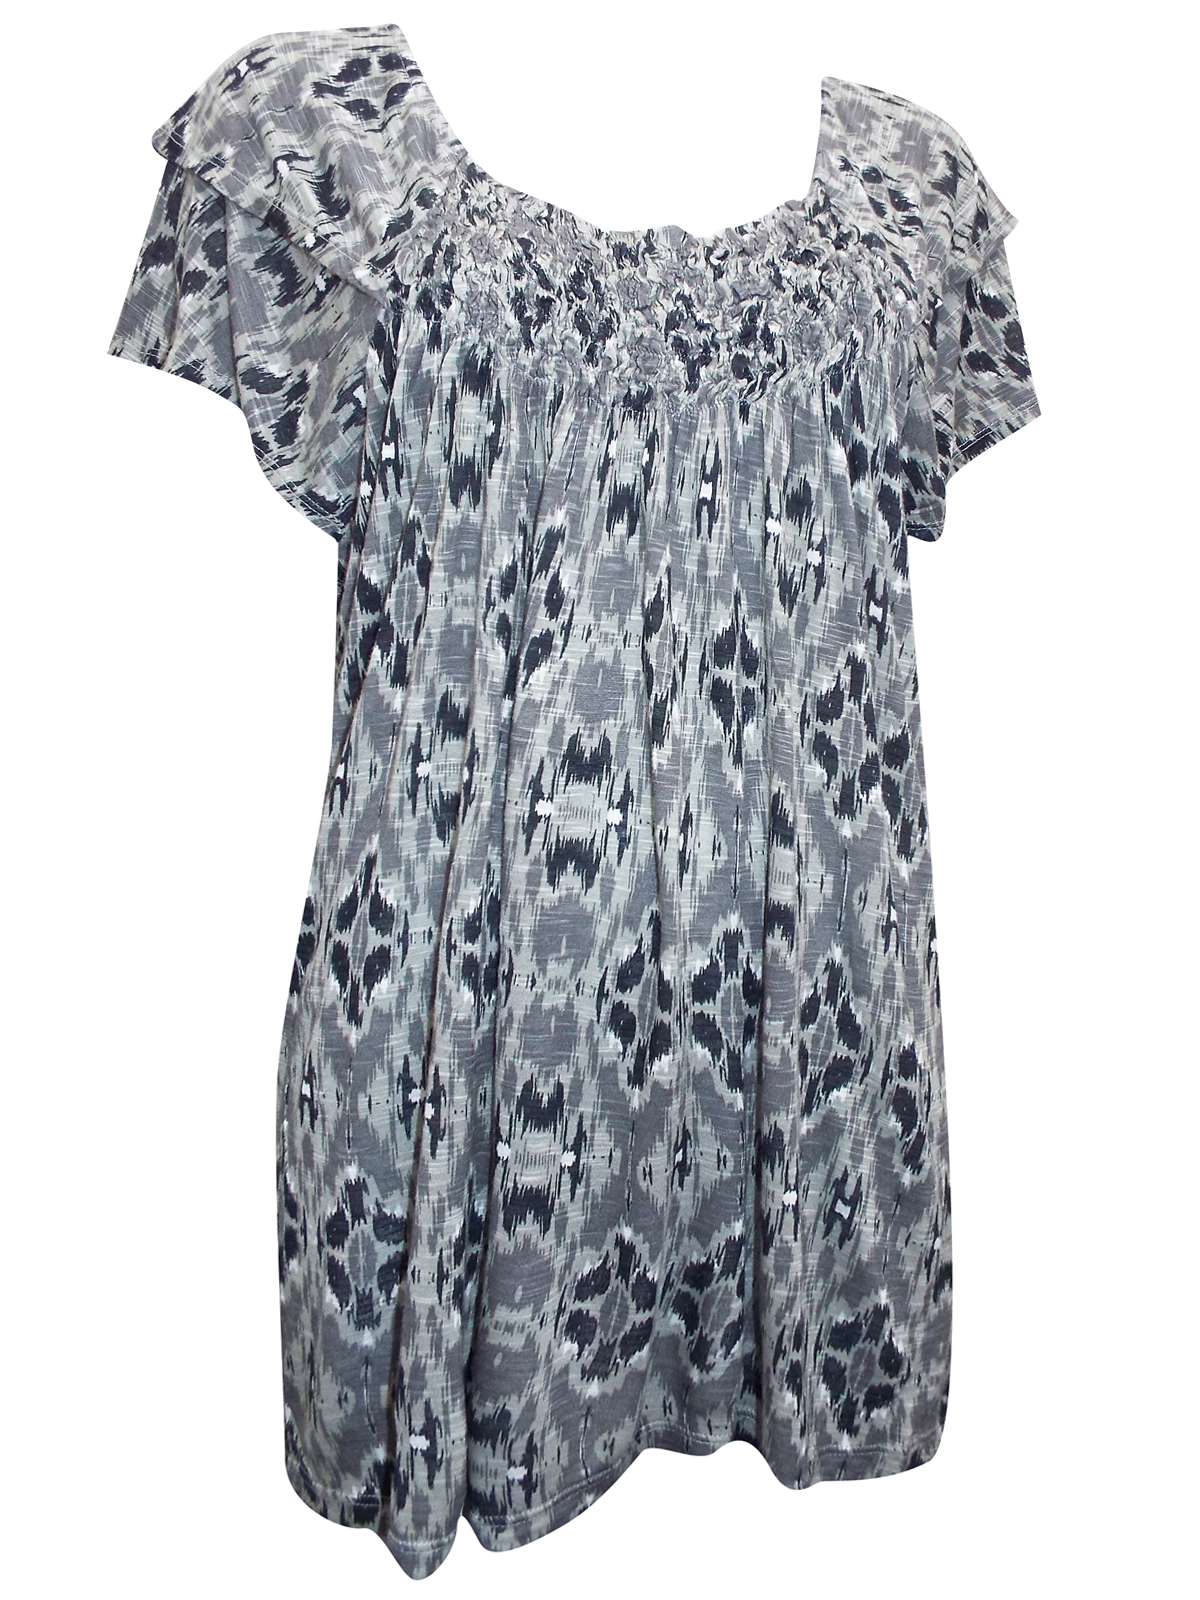 GNW - - GNW GREY Printed Layered Sleeve Smocked Panel Top - Size 14 to ...